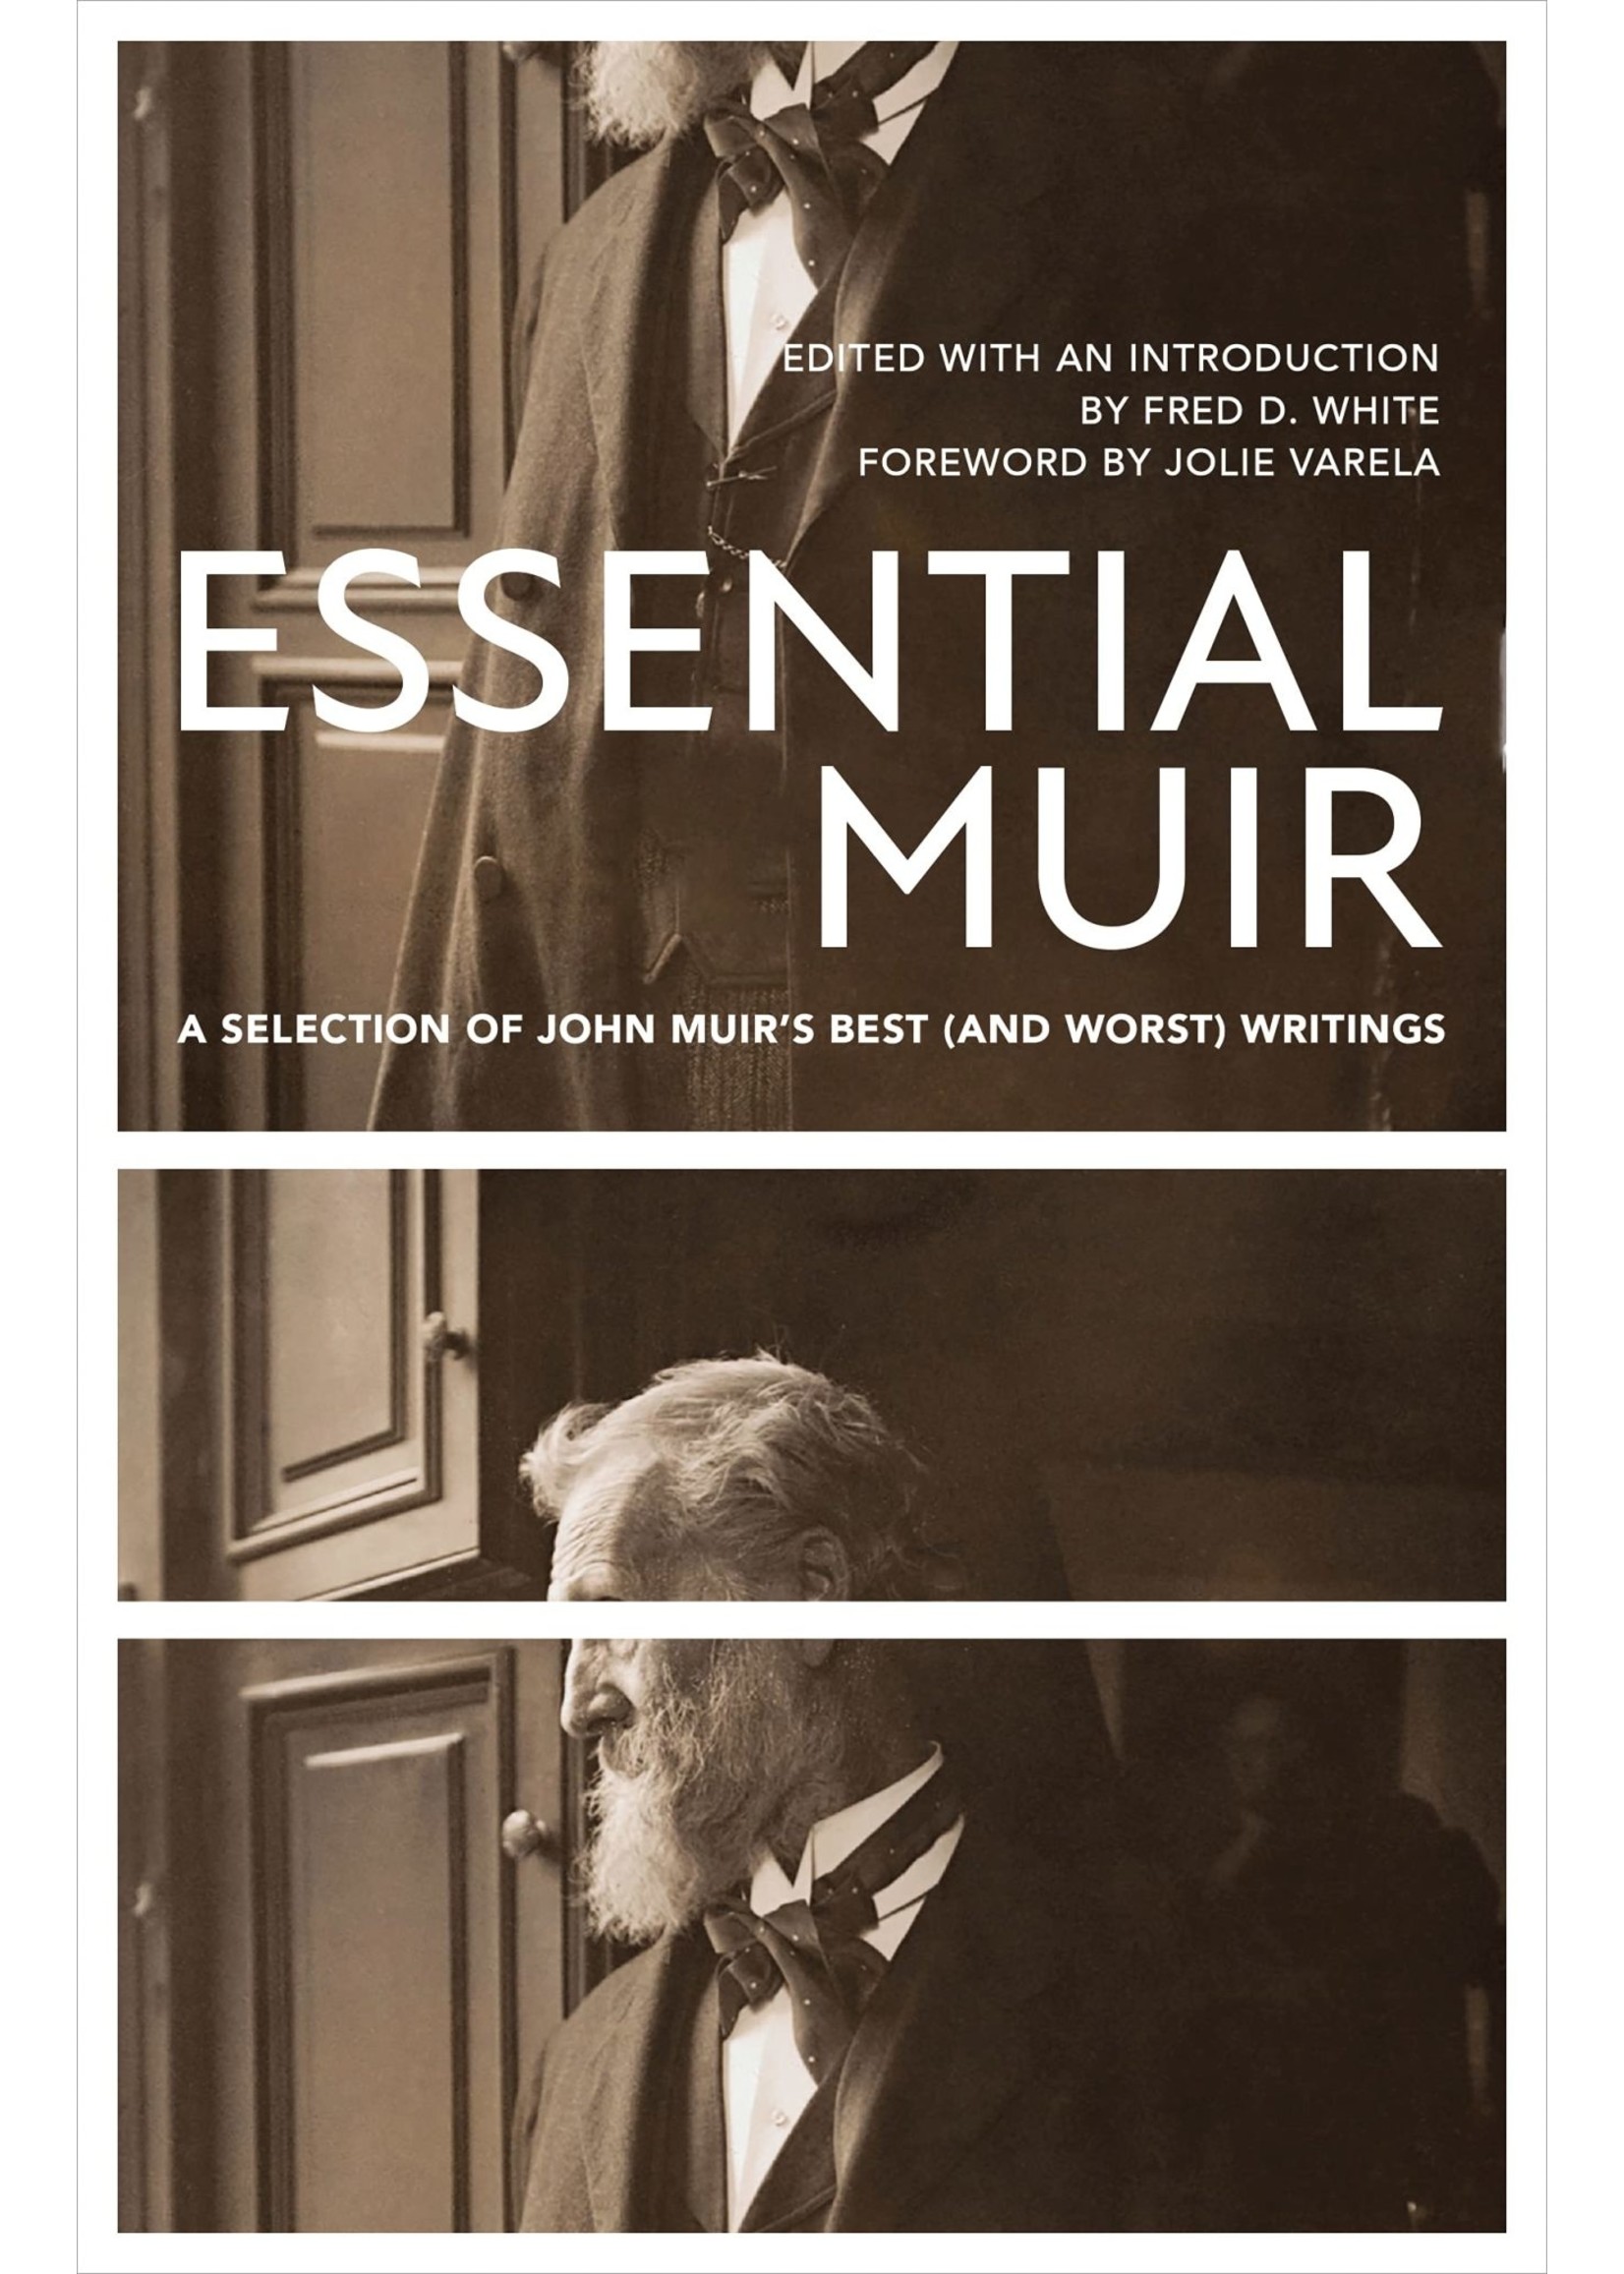 Essential Muir (Revised): A Selection of John Muir’s Best (and Worst) Writings by John Muir, Fred White, Jolie Varela